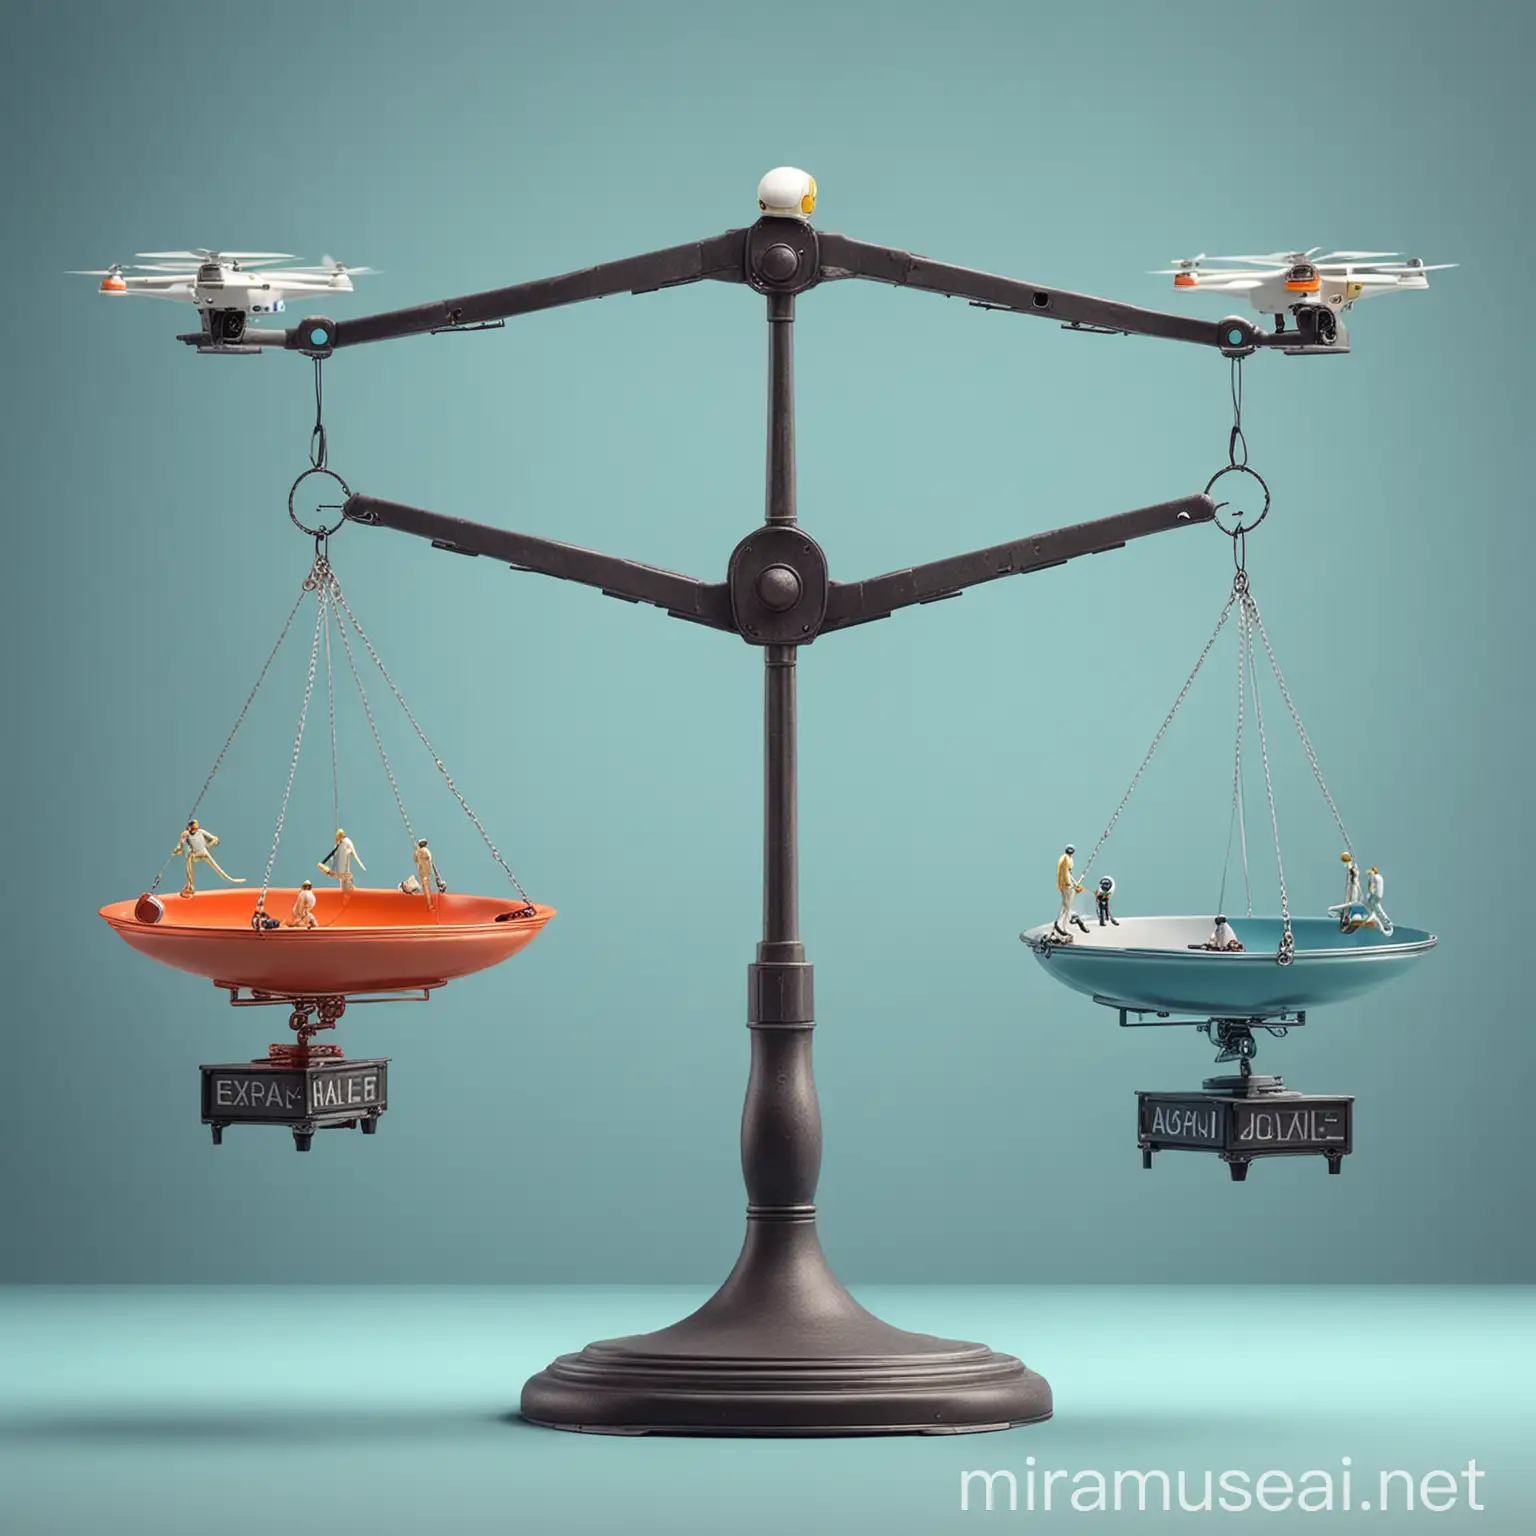 balance scale weighing drones and algorithms on the one side and humanity on the other side; digitalisation of society; aviation and security; justice and fairness; happy colours positive future, light, nice details 